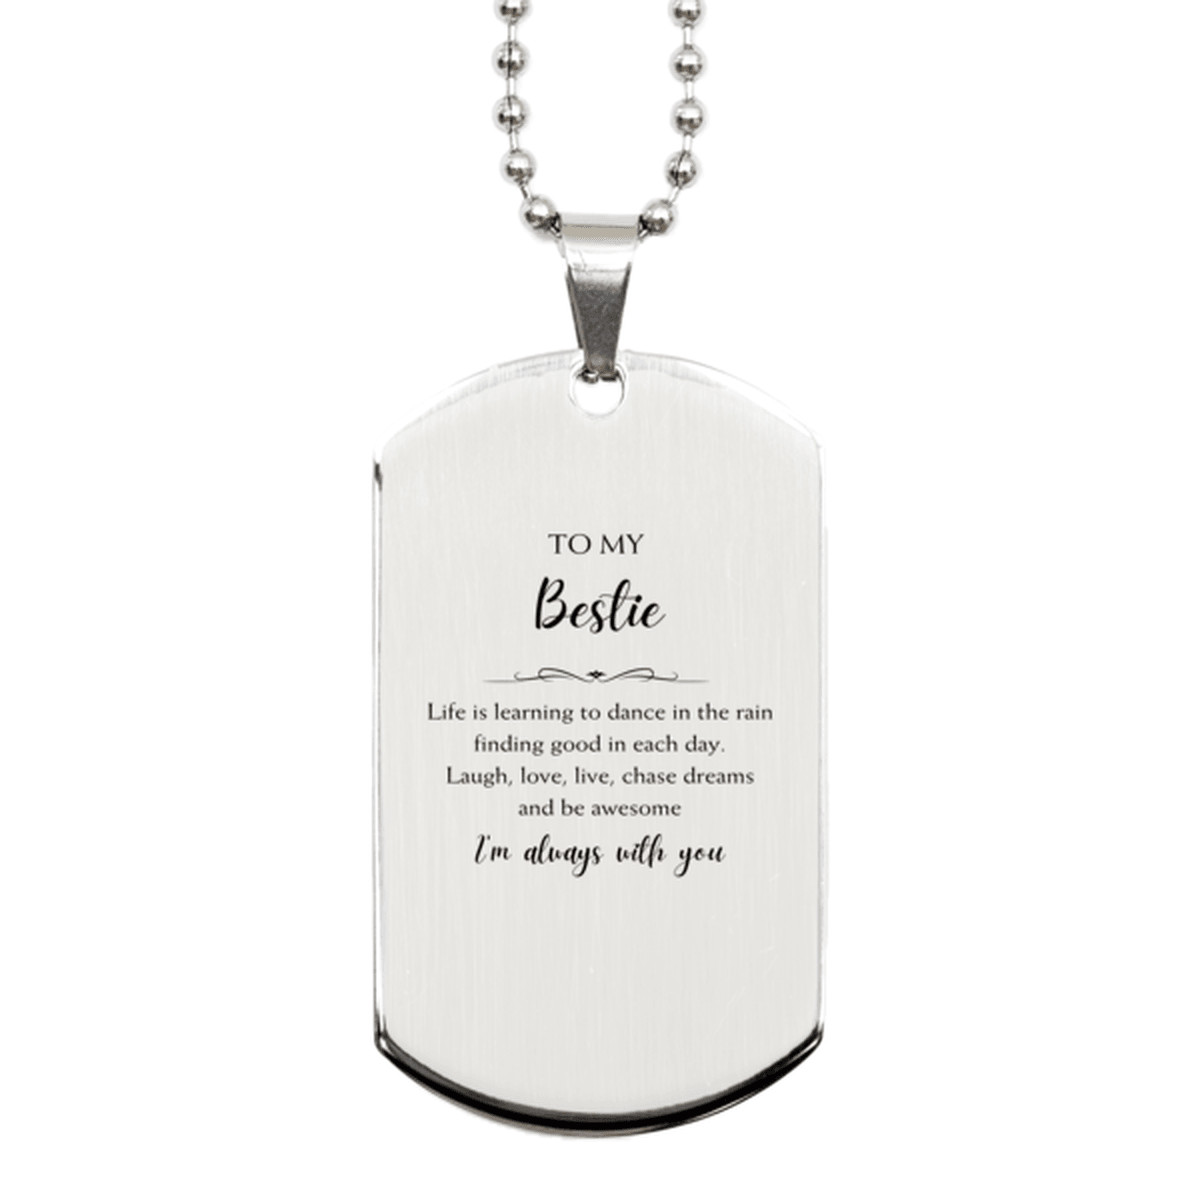 Bestie Christmas Perfect Gifts, Bestie Silver Dog Tag, Motivational Bestie Engraved Gifts, Birthday Gifts For Bestie, To My Bestie Life is learning to dance in the rain, finding good in each day. I'm always with you - Mallard Moon Gift Shop